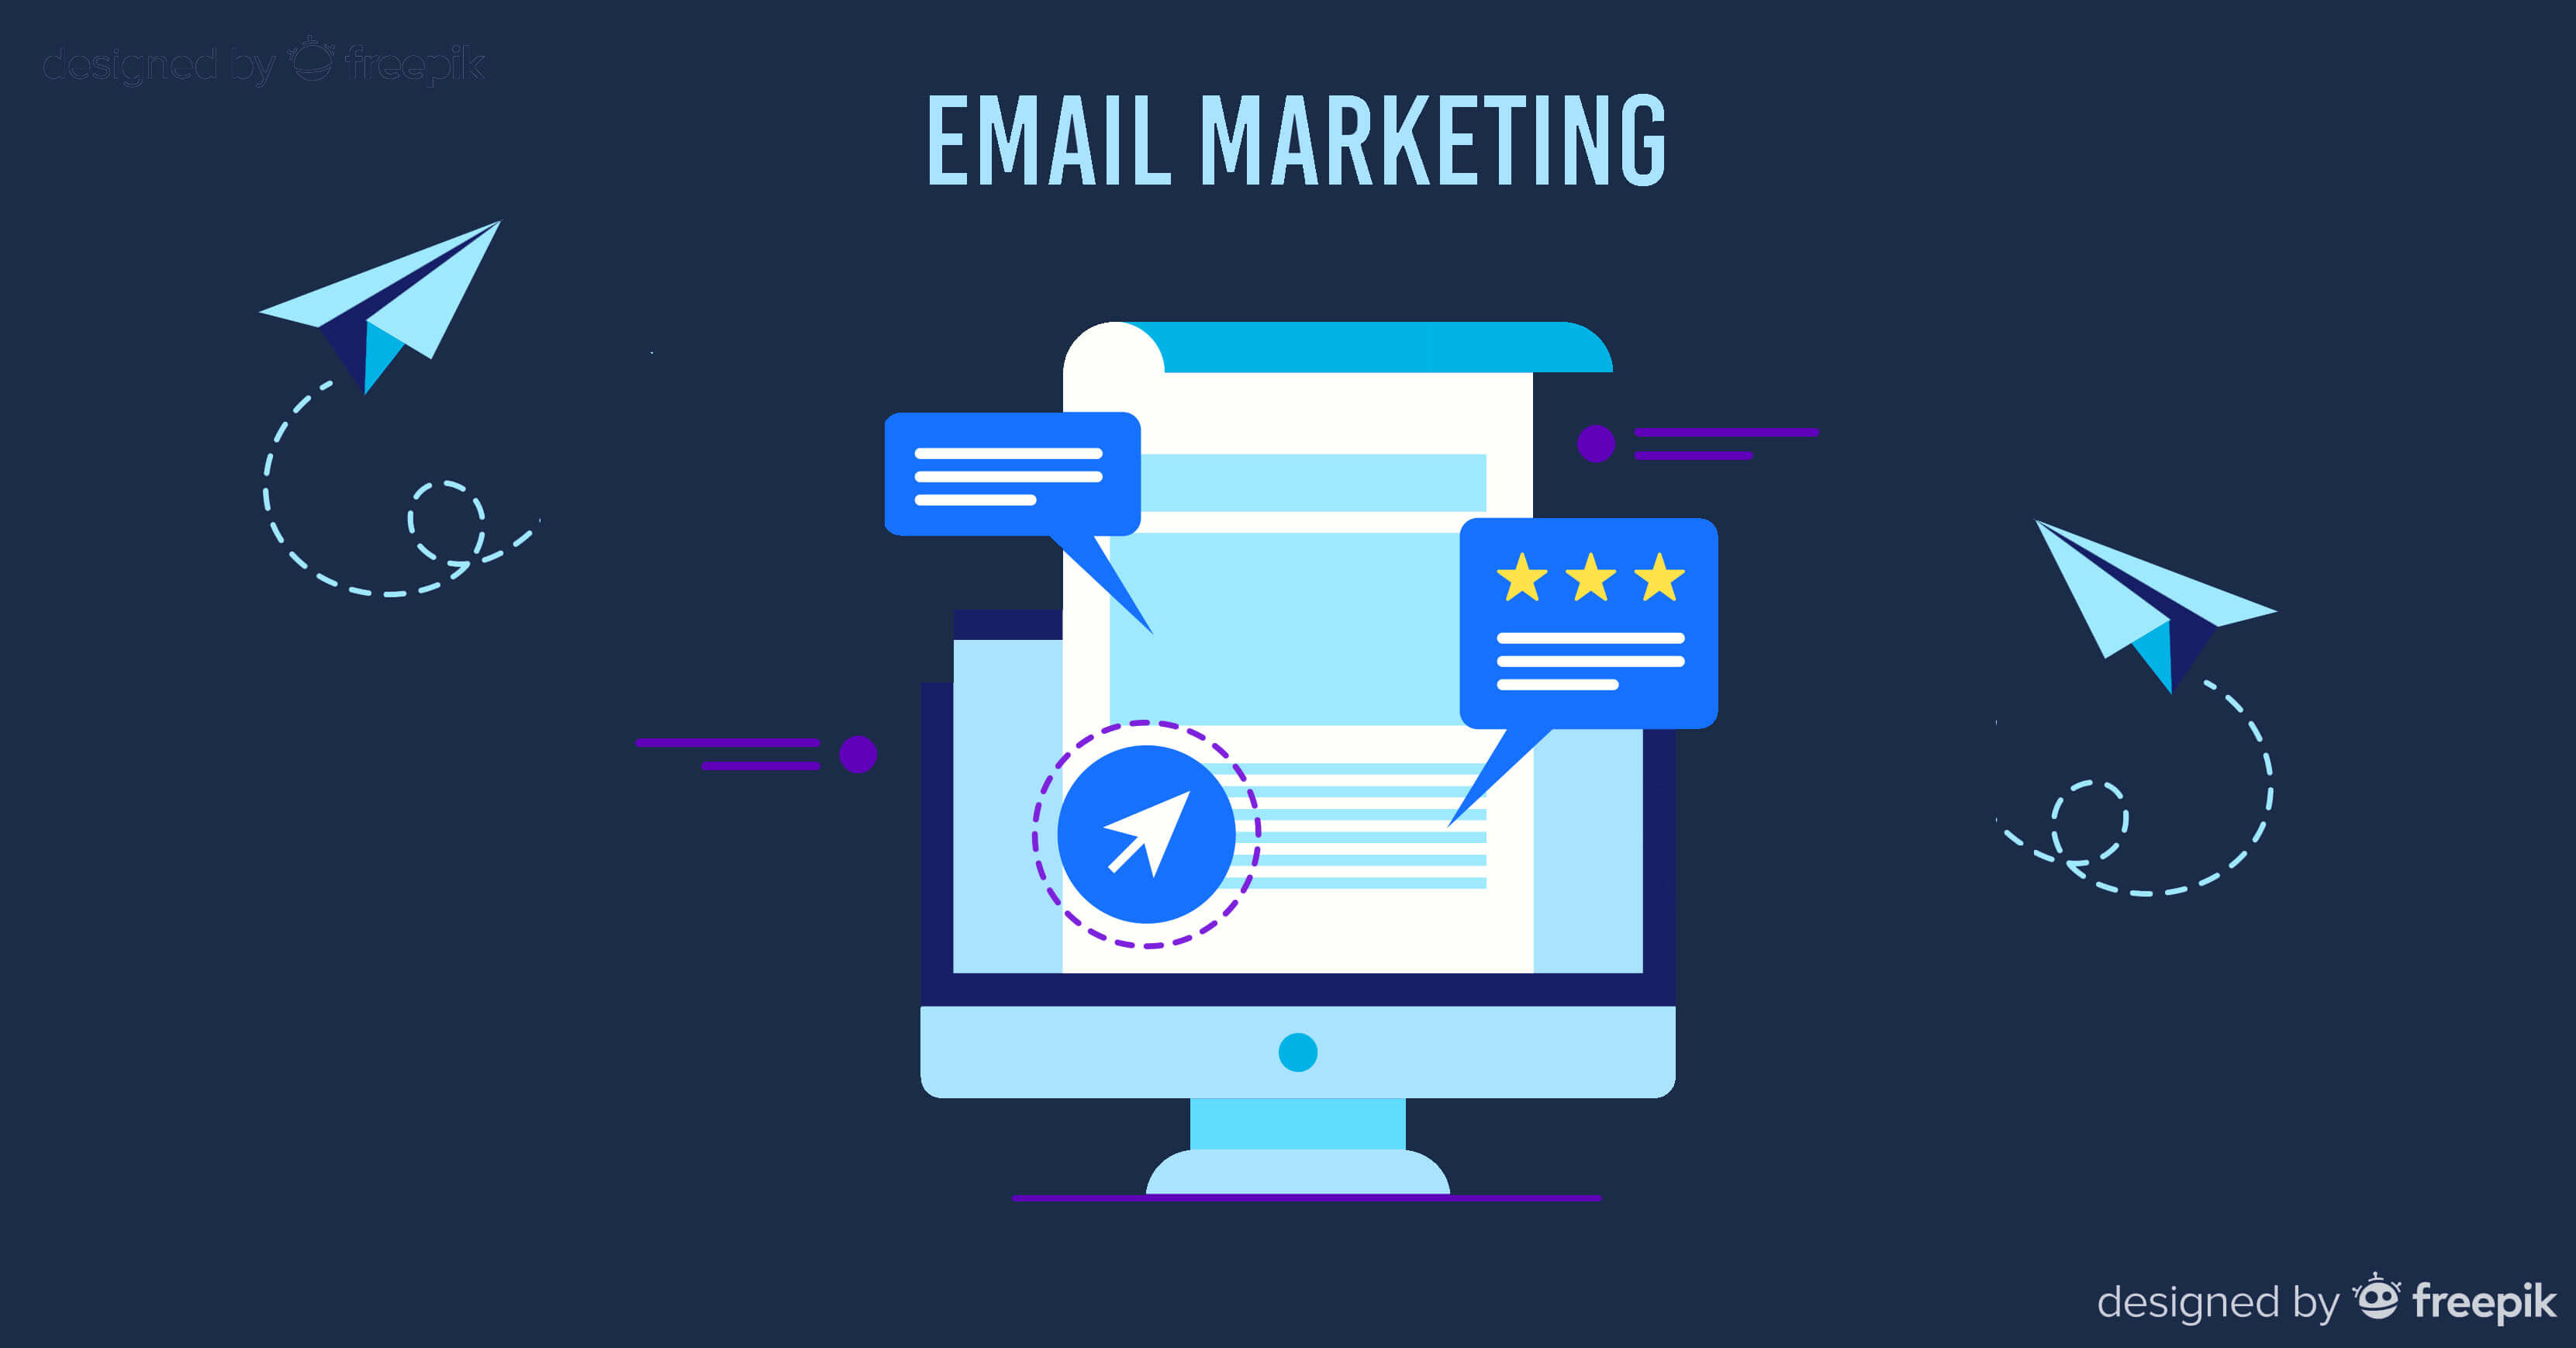 E-mail marketing strategies and practices in 2019